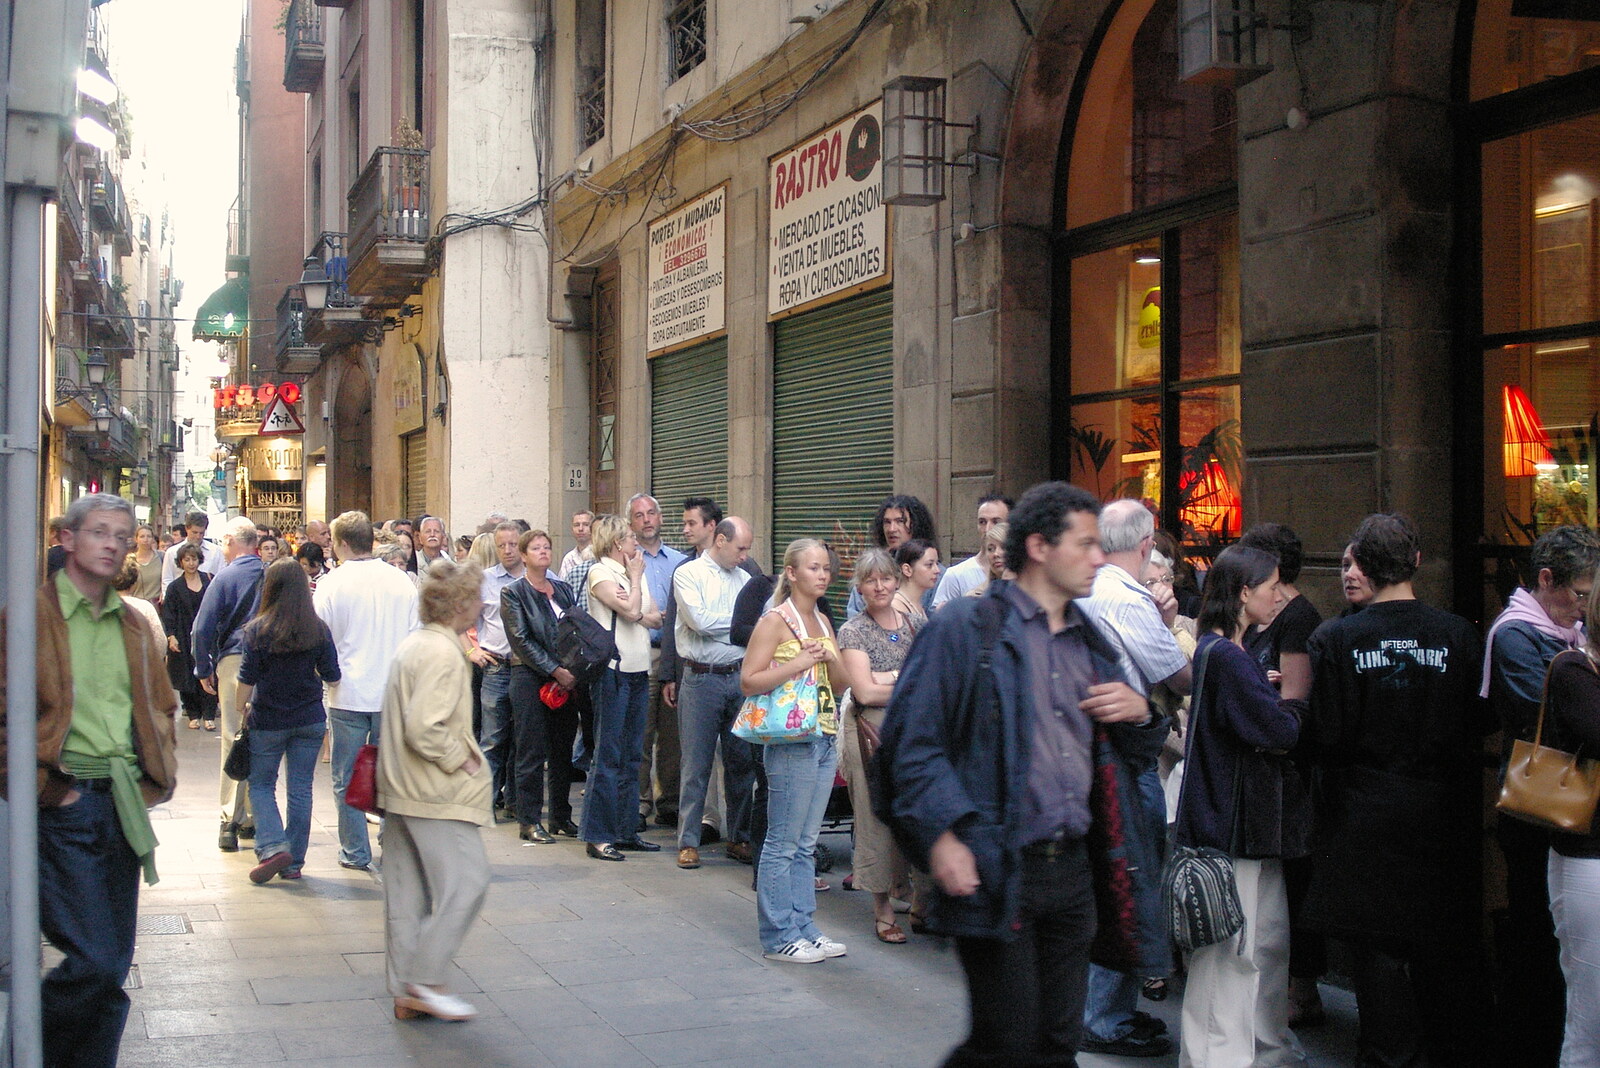 There's a major queueing situation from A Trip to Barcelona, Catalunya, Spain - 29th April 2005